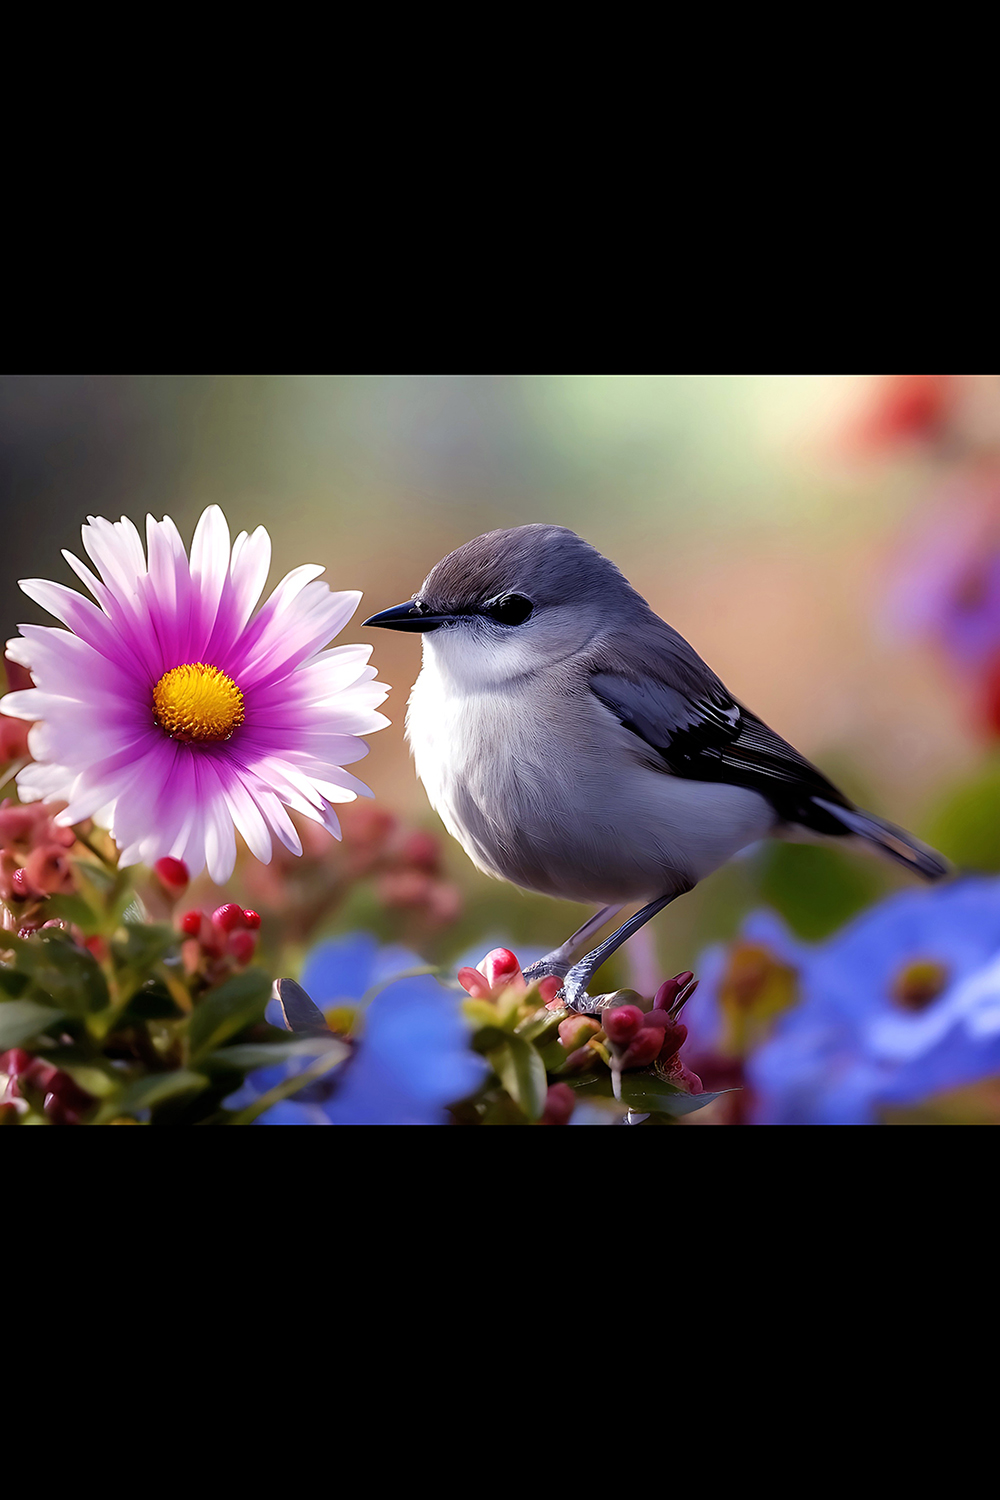 A bird with a blue head and gray feathers sits on a branch with some flowers in generated pinterest preview image.